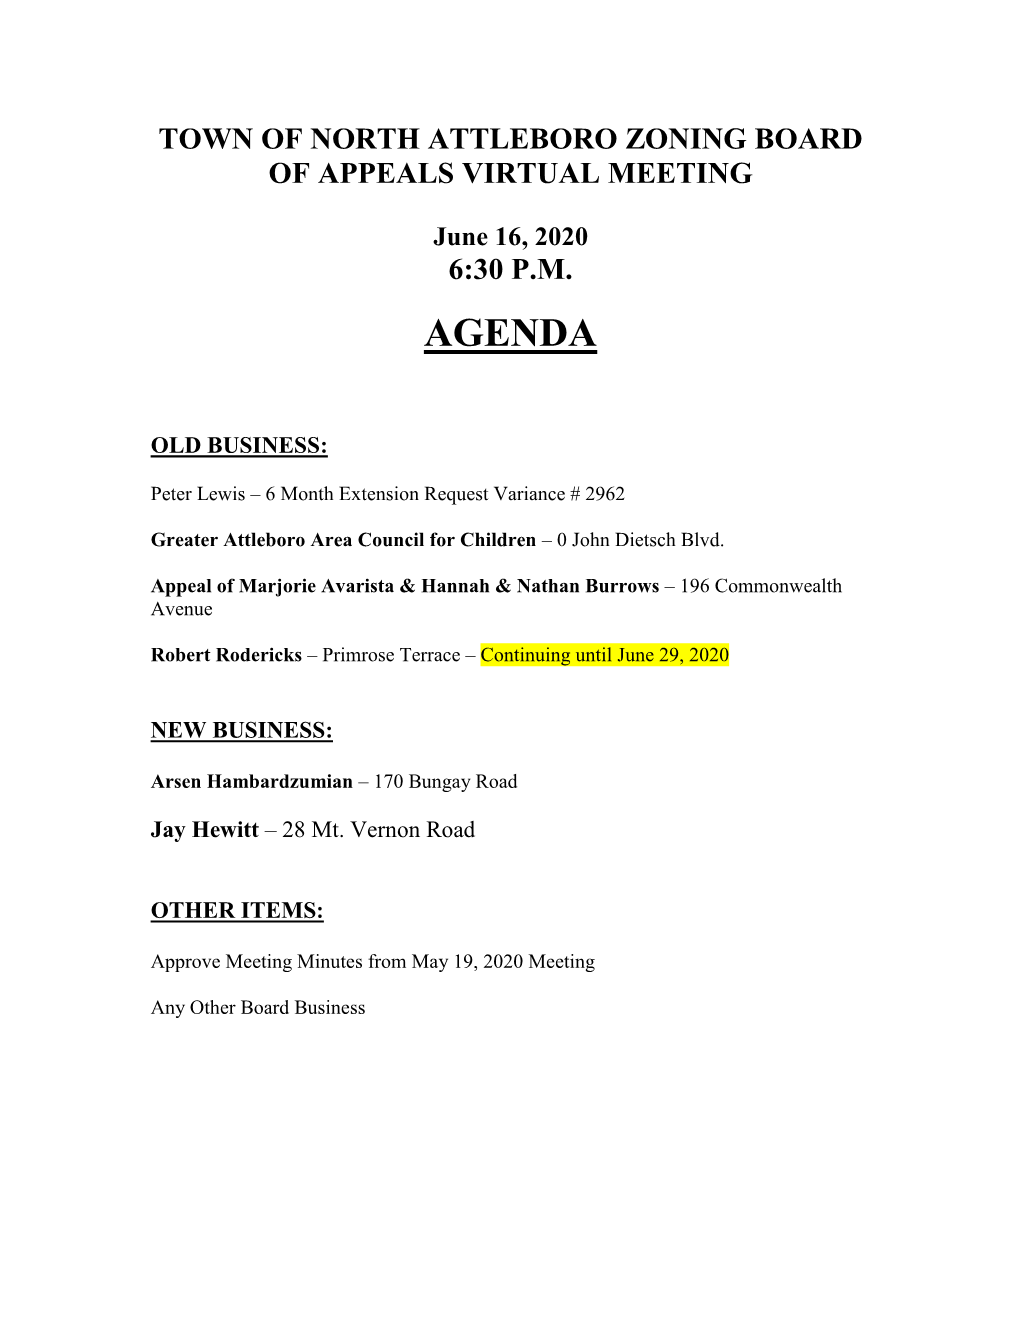 Town of North Attleboro Zoning Board of Appeals Virtual Meeting